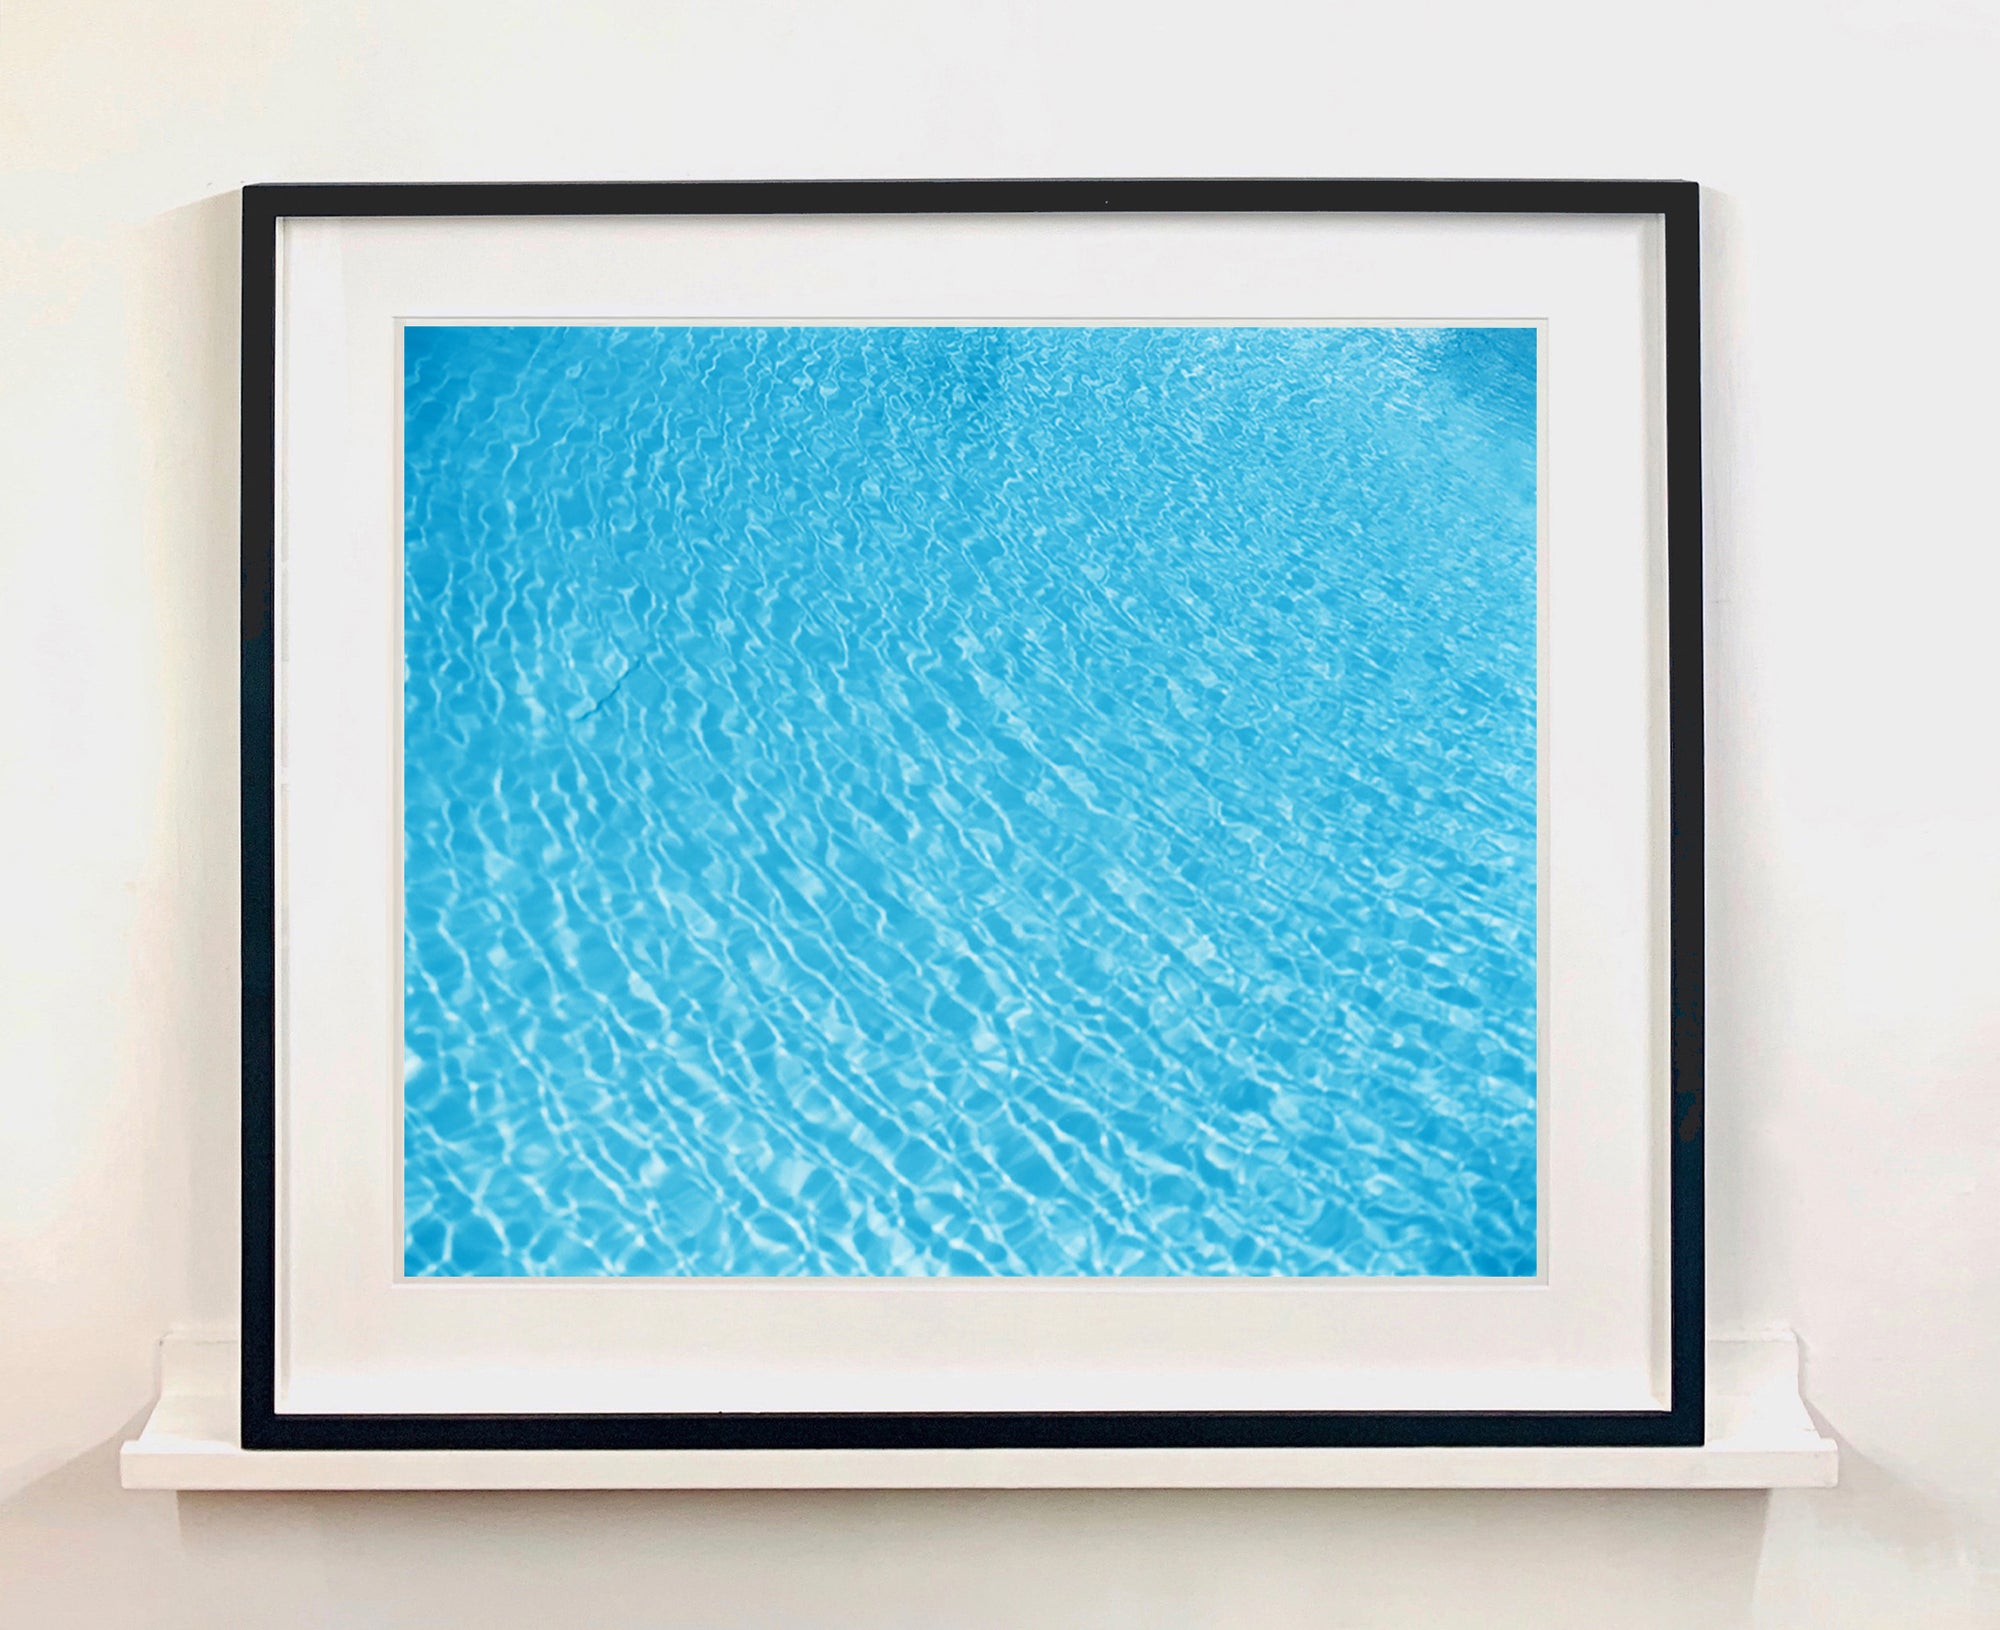 'Algiers Pool', photographed by Richard Heeps in Las Vegas, is the perfect way to bring summer vibes into your home all year round. The glistening pool water is idyllic and inviting.